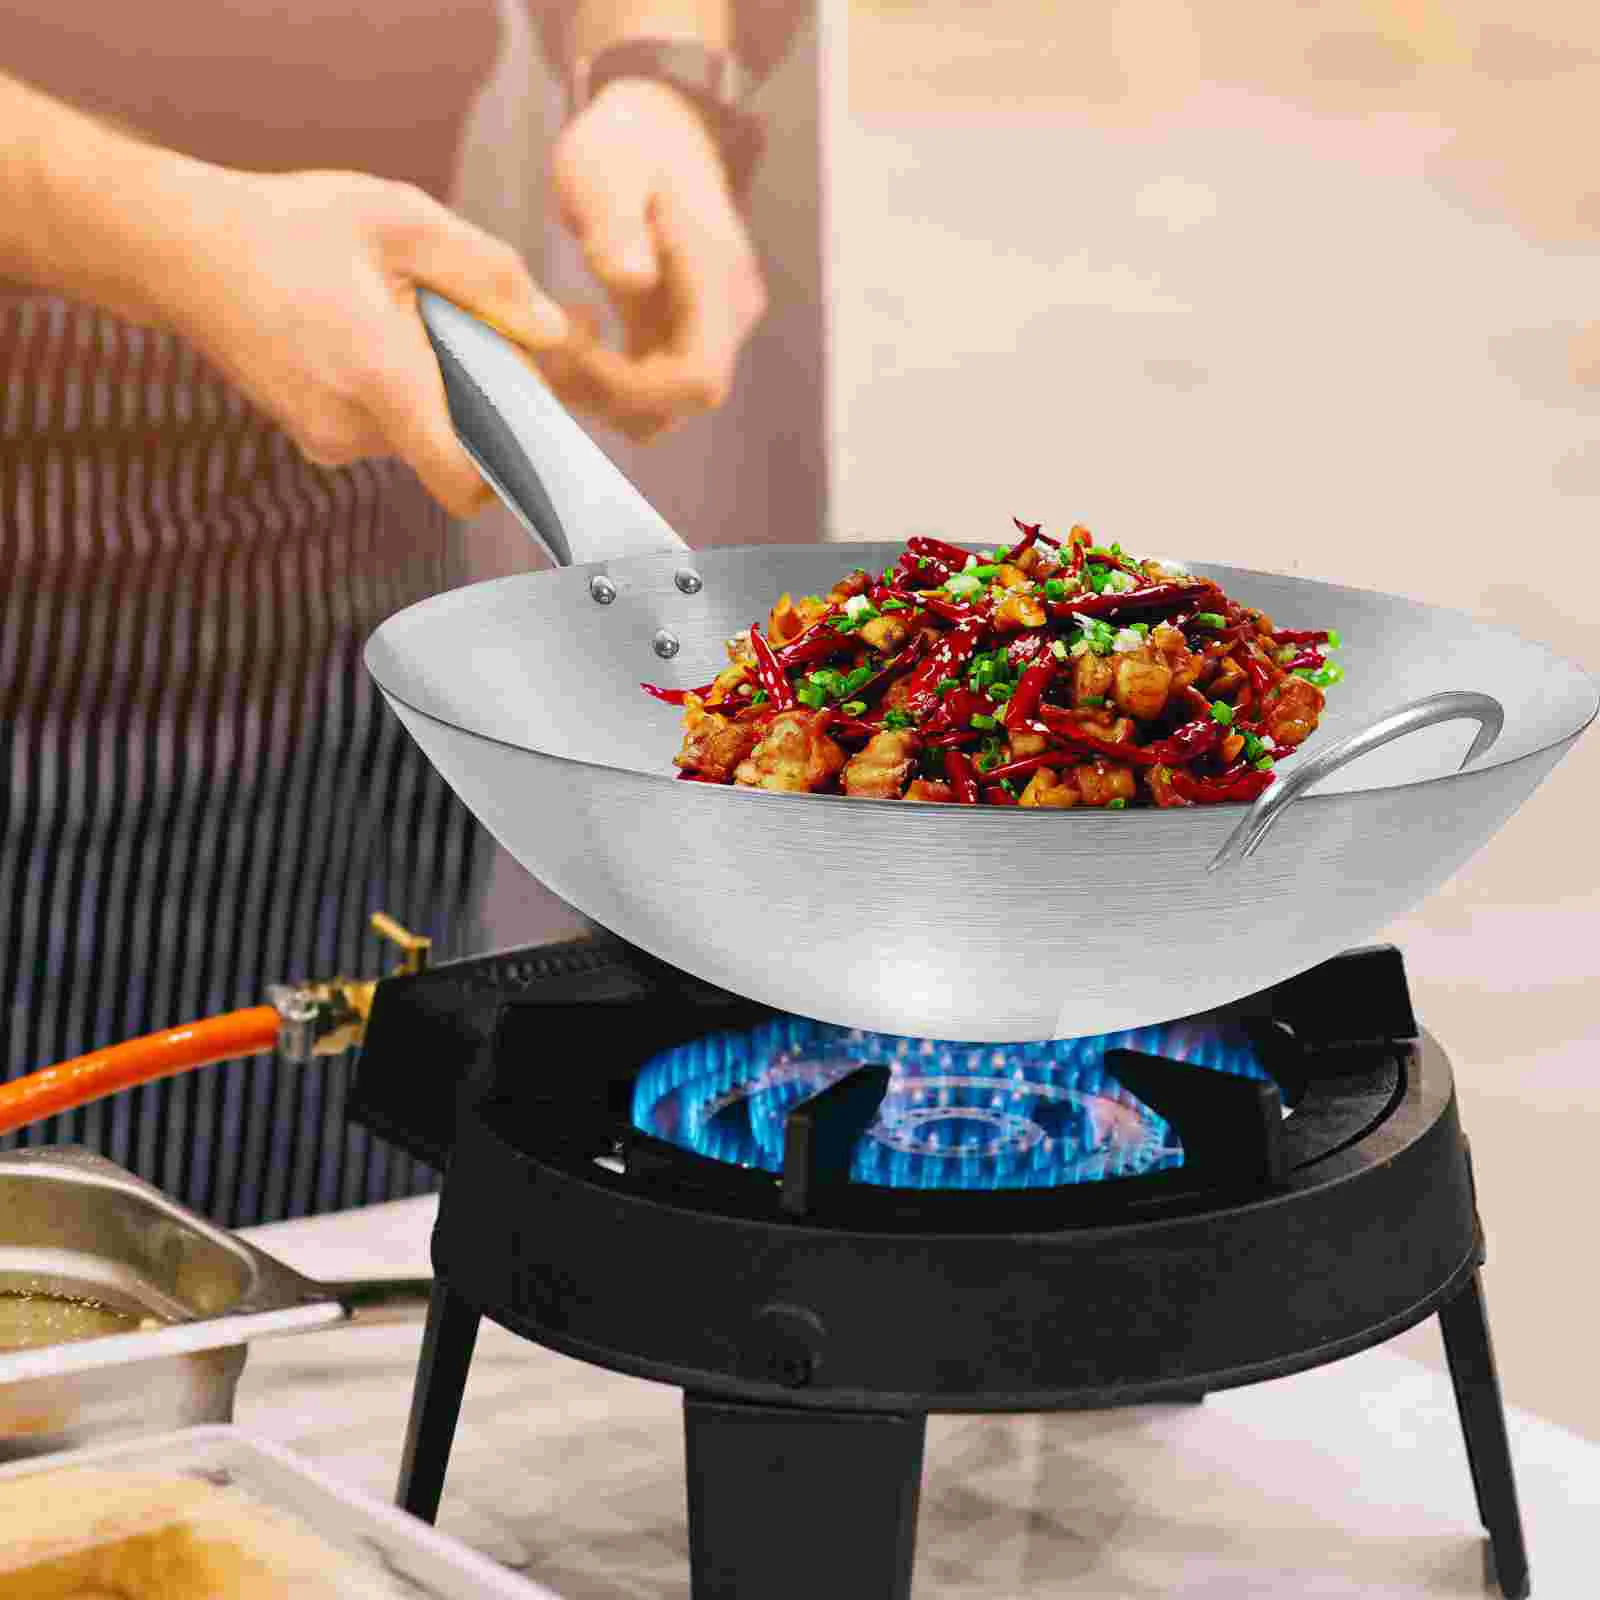 

Stainless Steel Wok Stir-fry Pan Non-stick Cookware Heavy Duty Restaurant Frying Everyday Stoves Induction Cooktop Pans